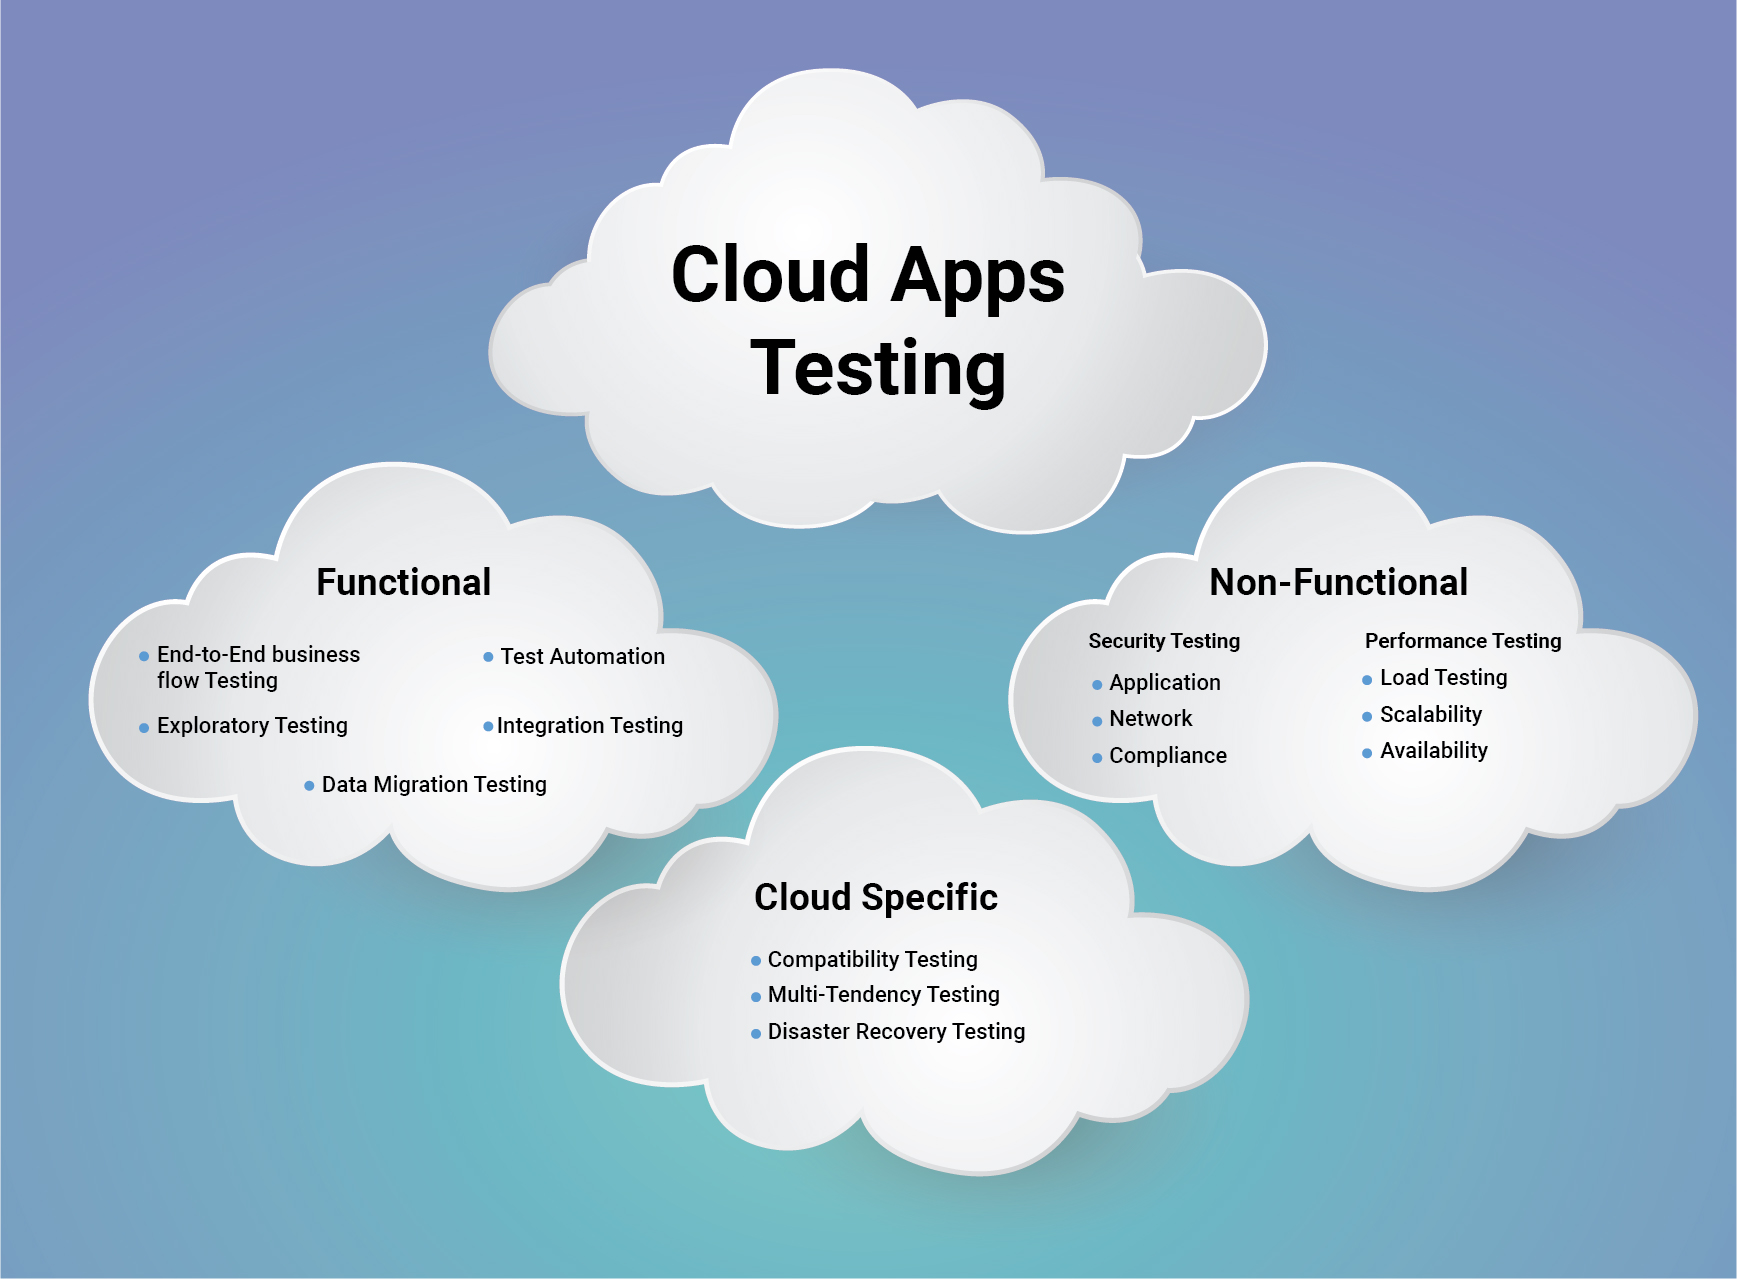 cloud testing services